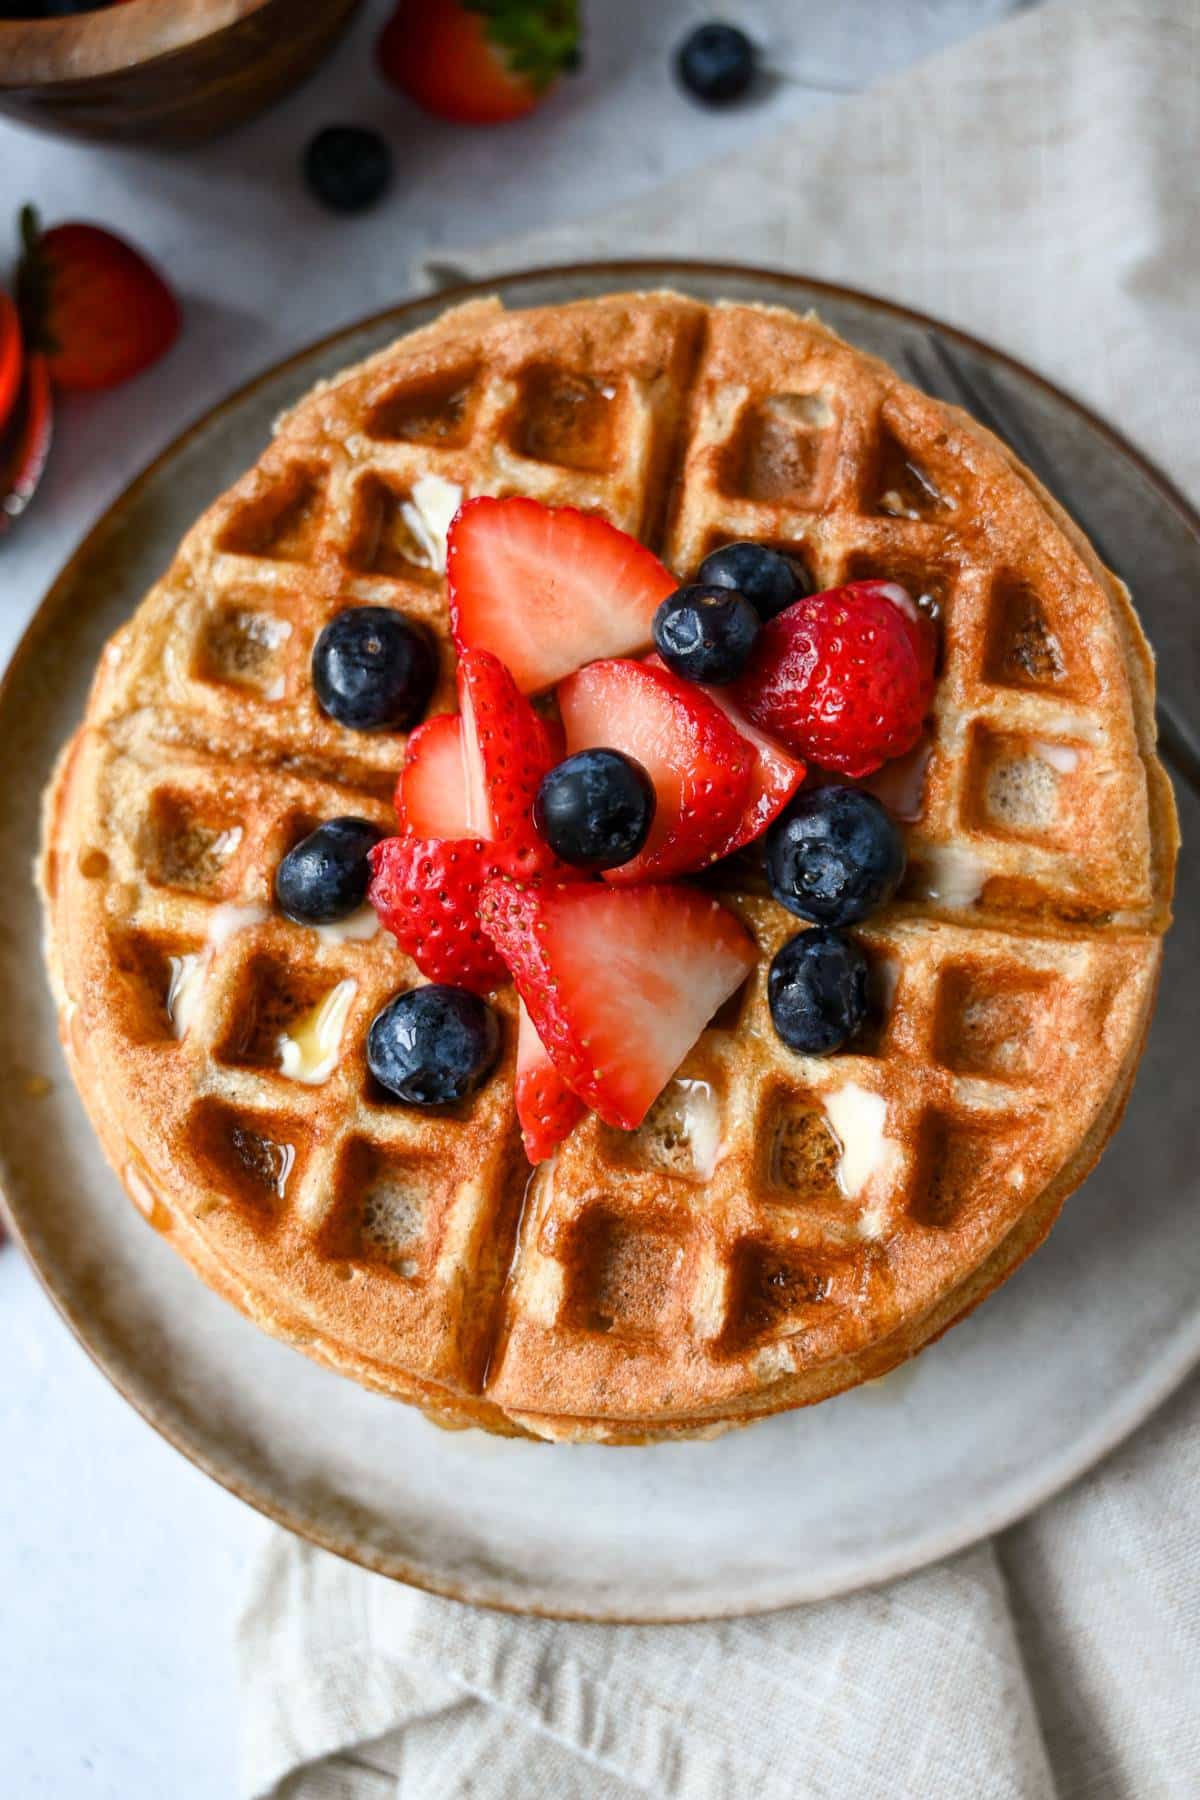 a waffle on a plate with a napkin upderneath with berries on top